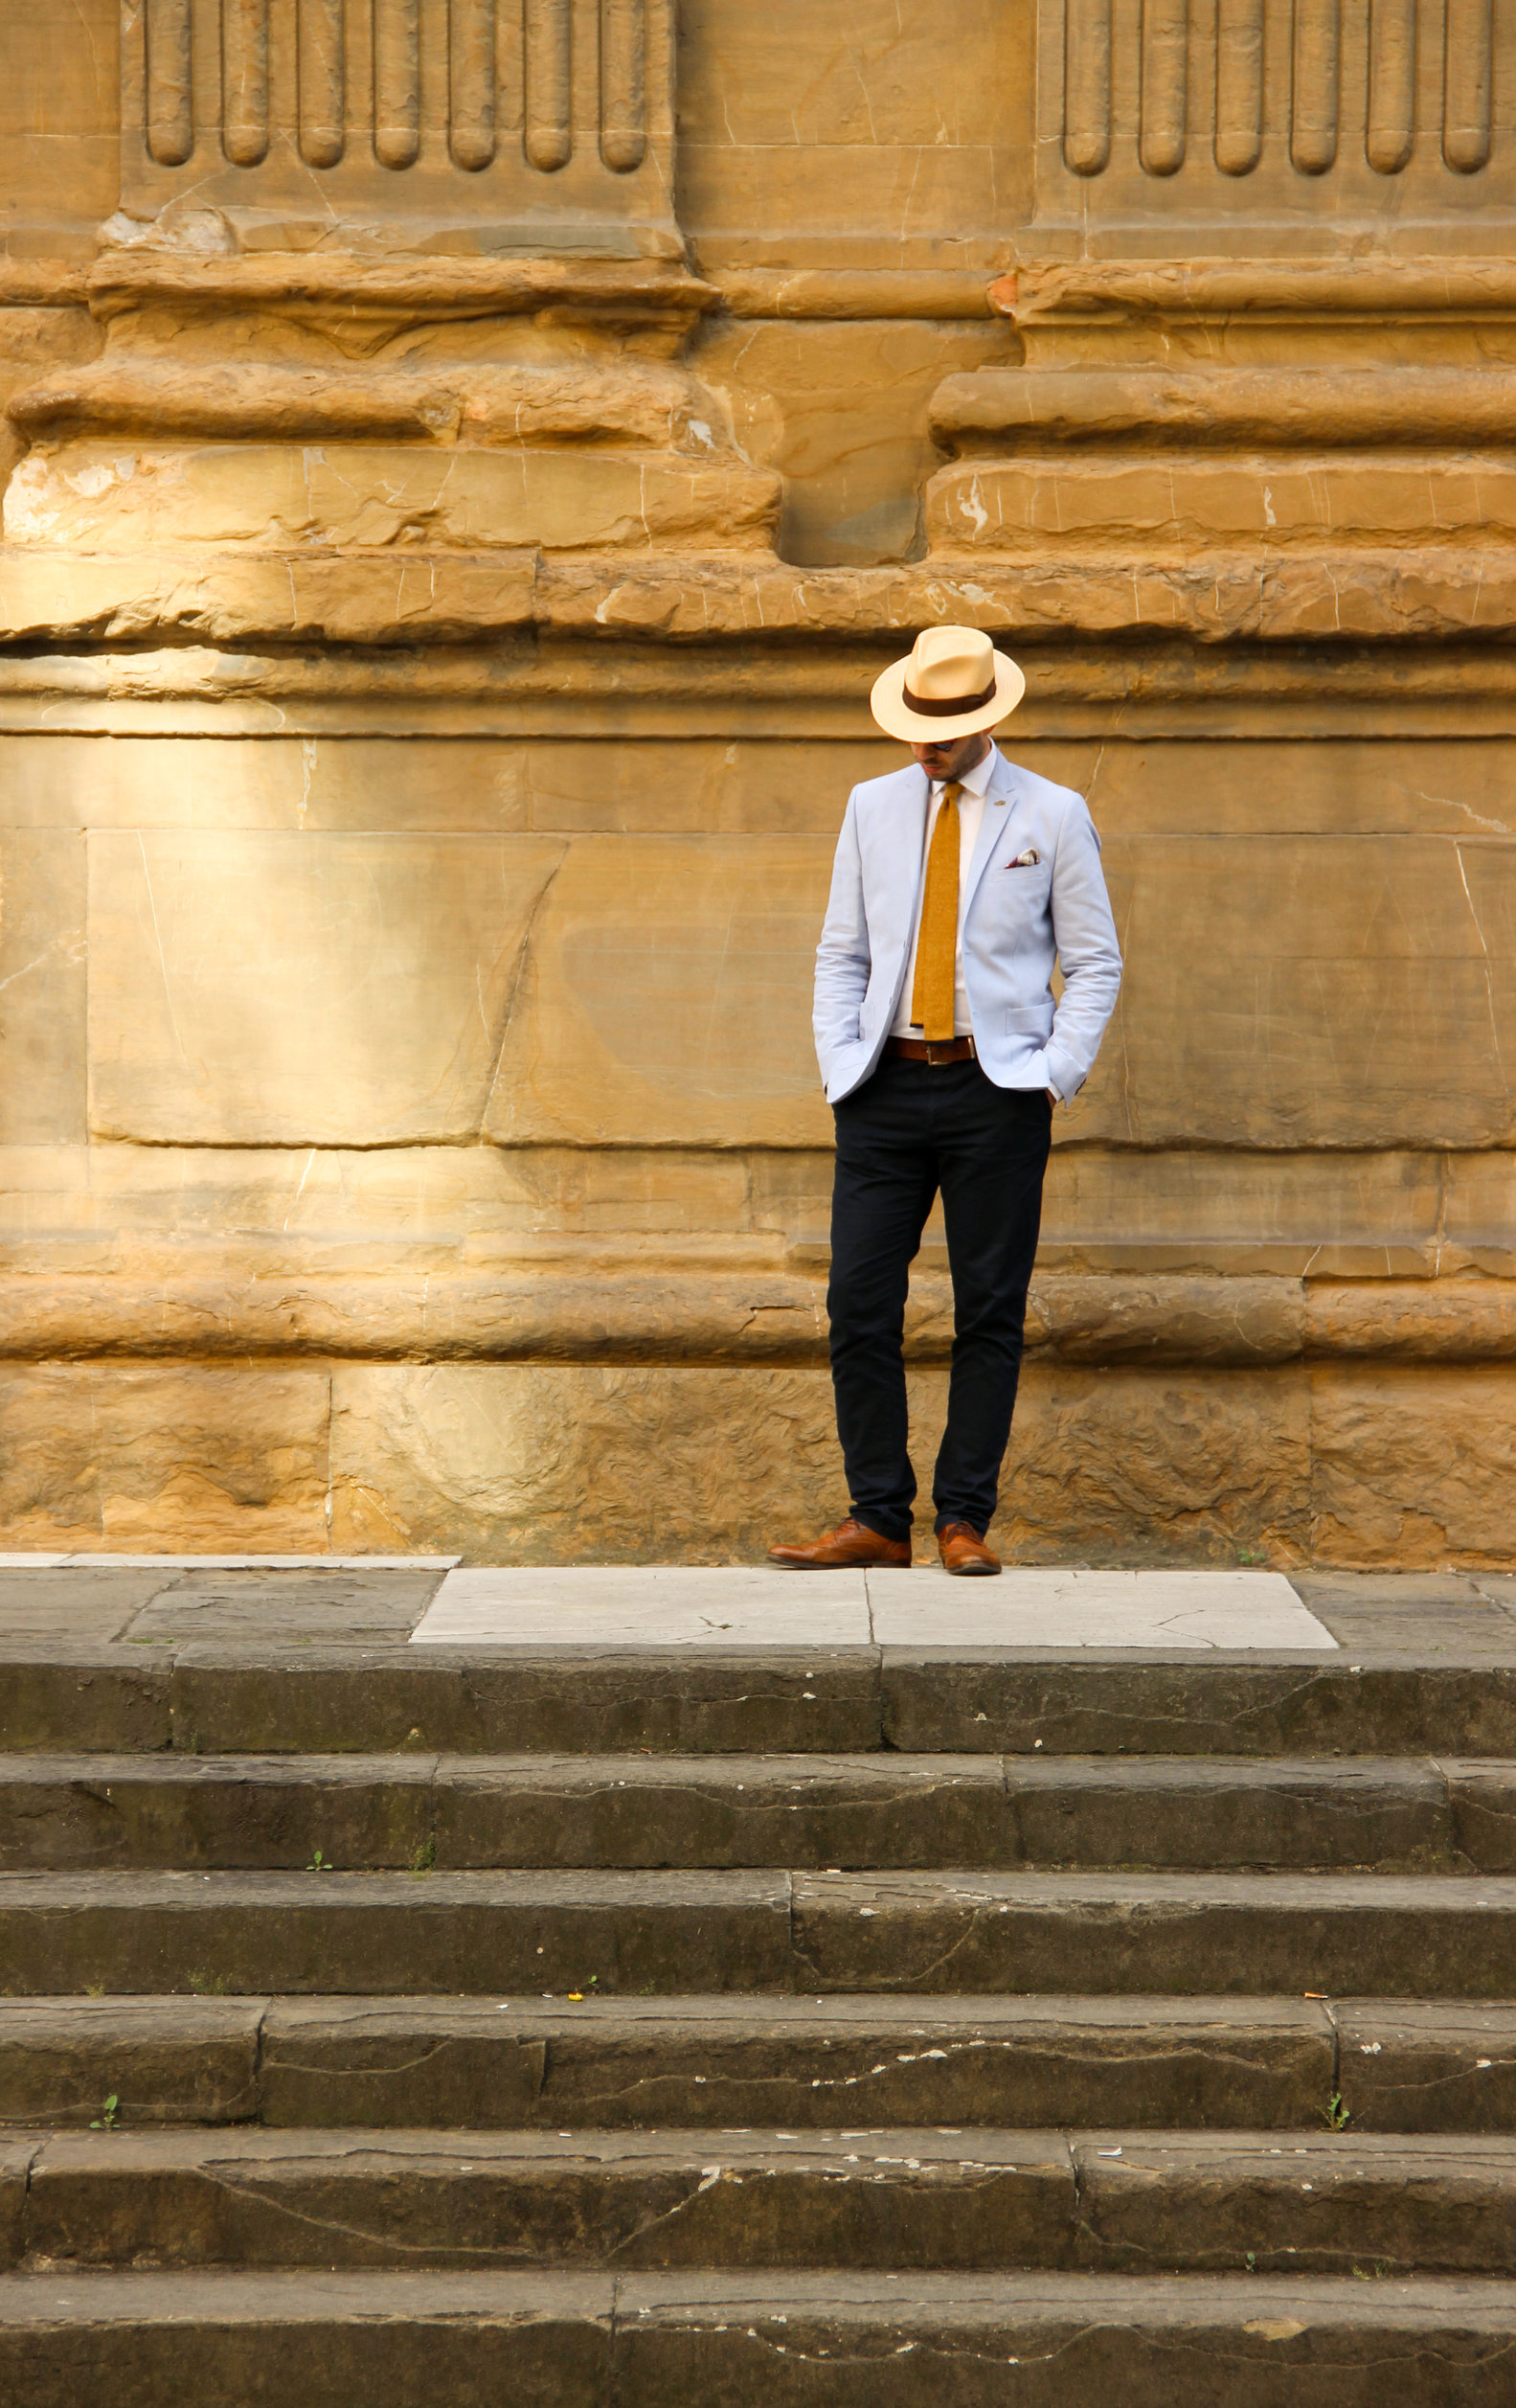 Pitti Uomo 90 - Panama Hat, Yellow Knit Tie and Florence Pocket Square by LONG STORY SHORT